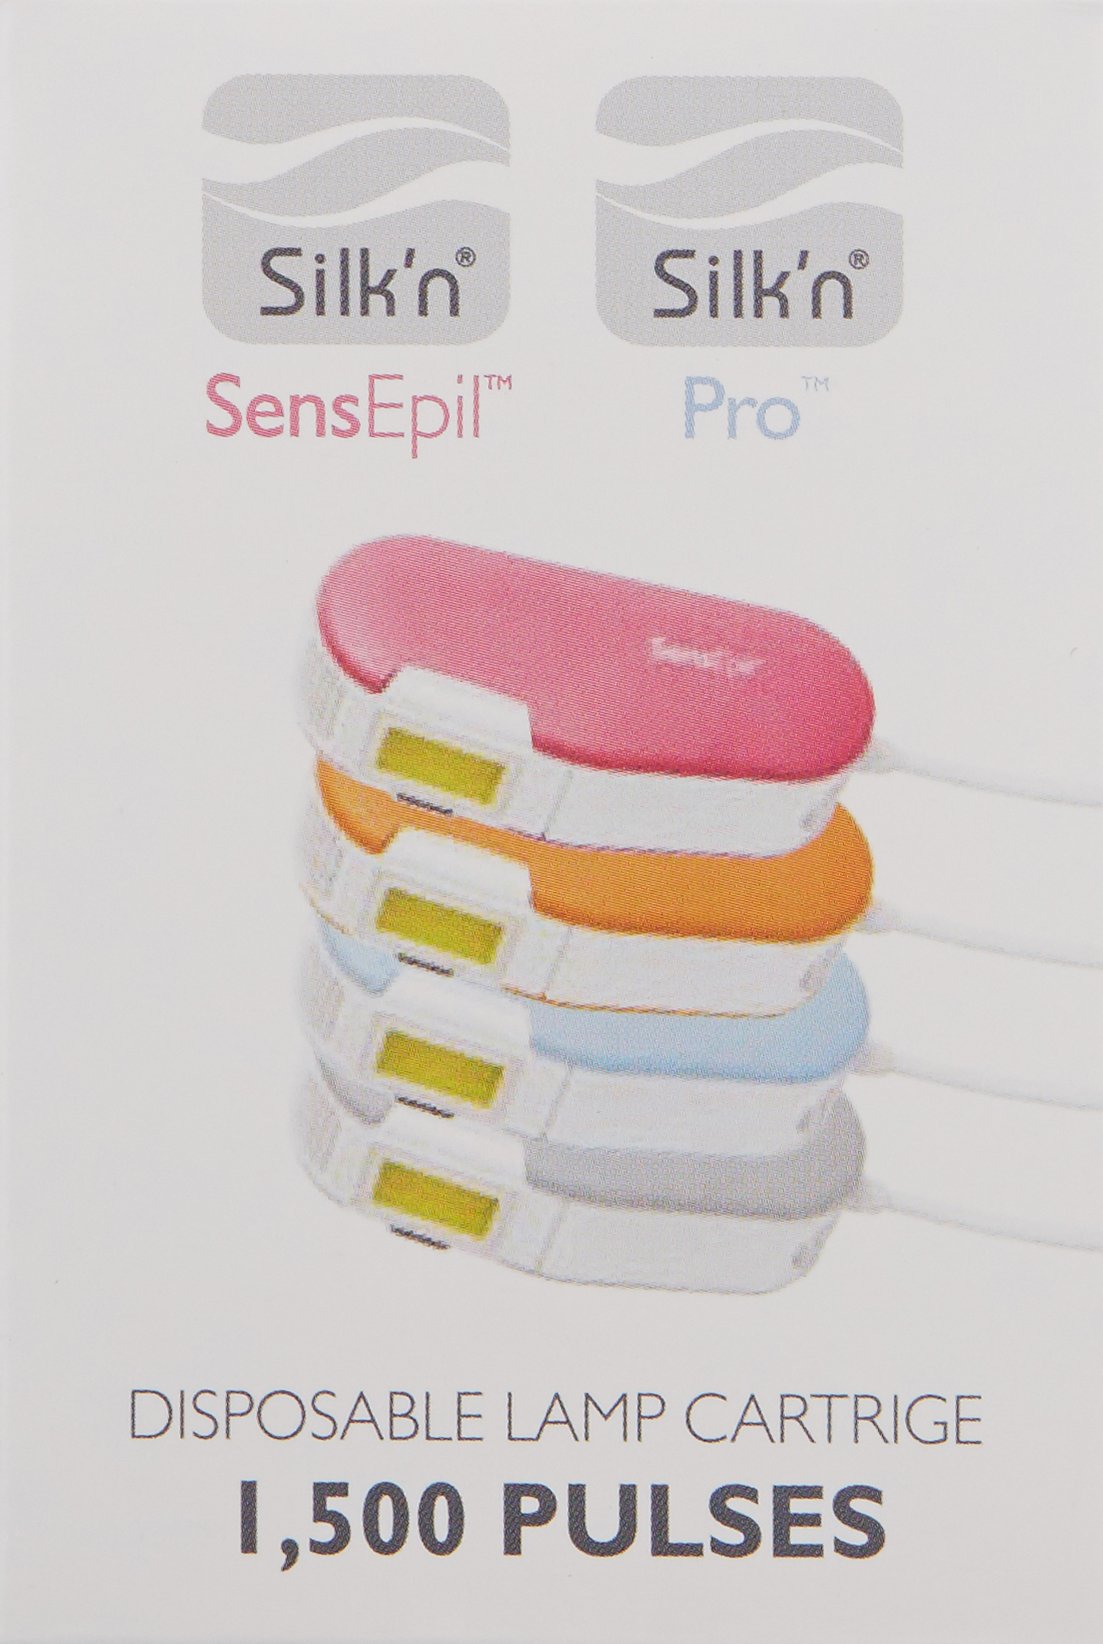 Silk’n Sensepil Replacement Cartridge For At Home Permanent Hair Removal Device For Women And Men - 4,500 Pulses (Pack Of 3)